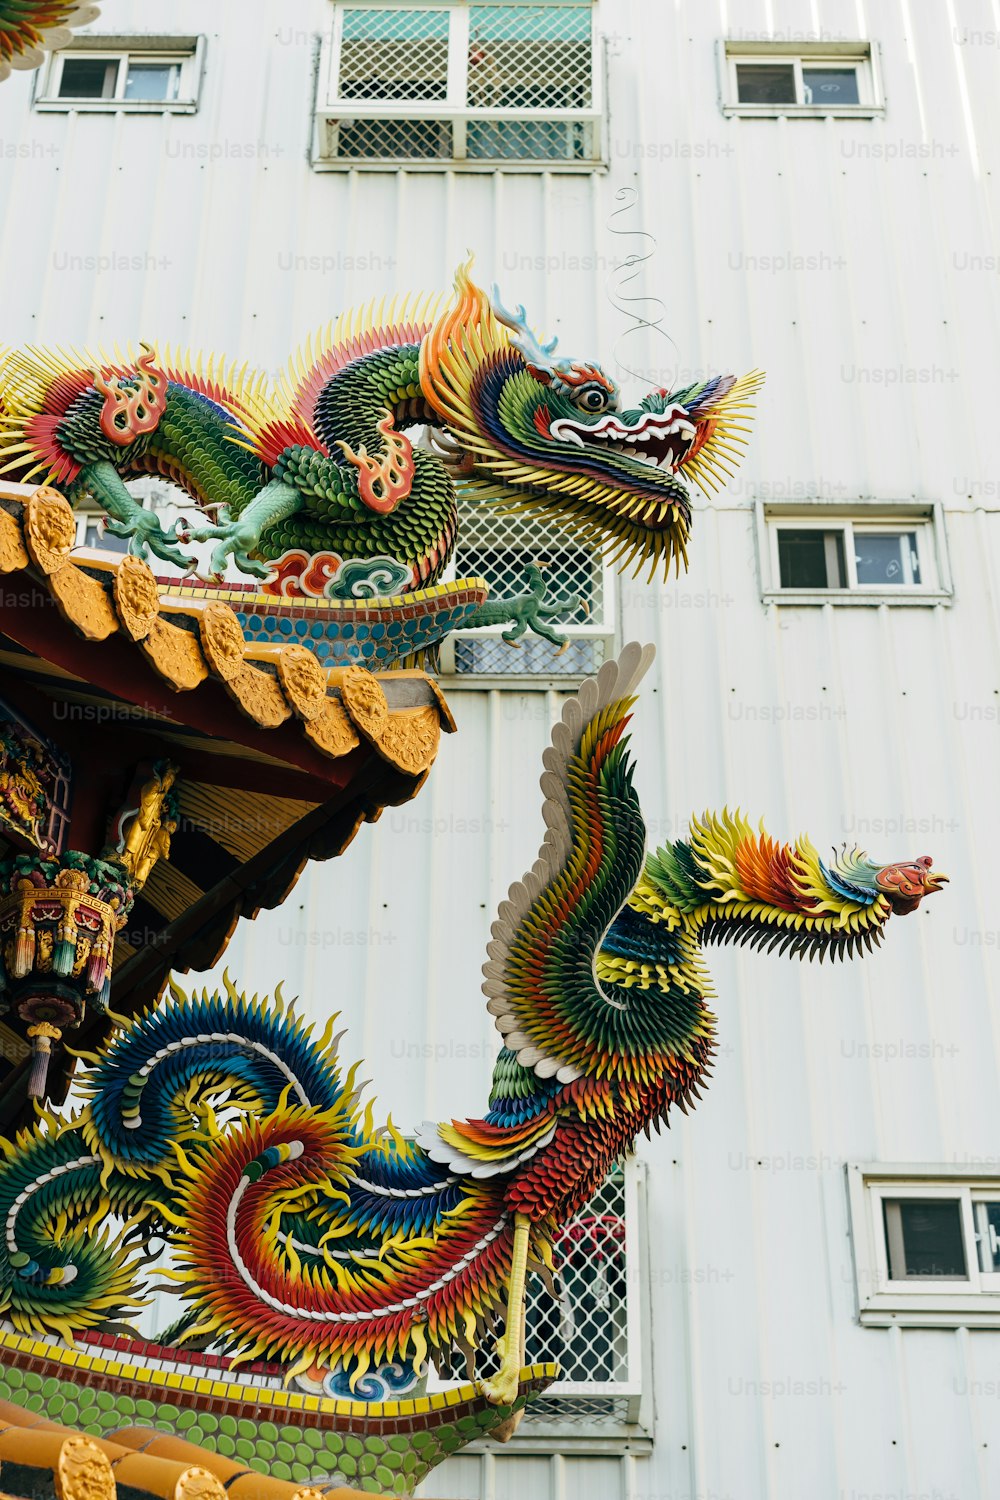 a dragon statue on the side of a building